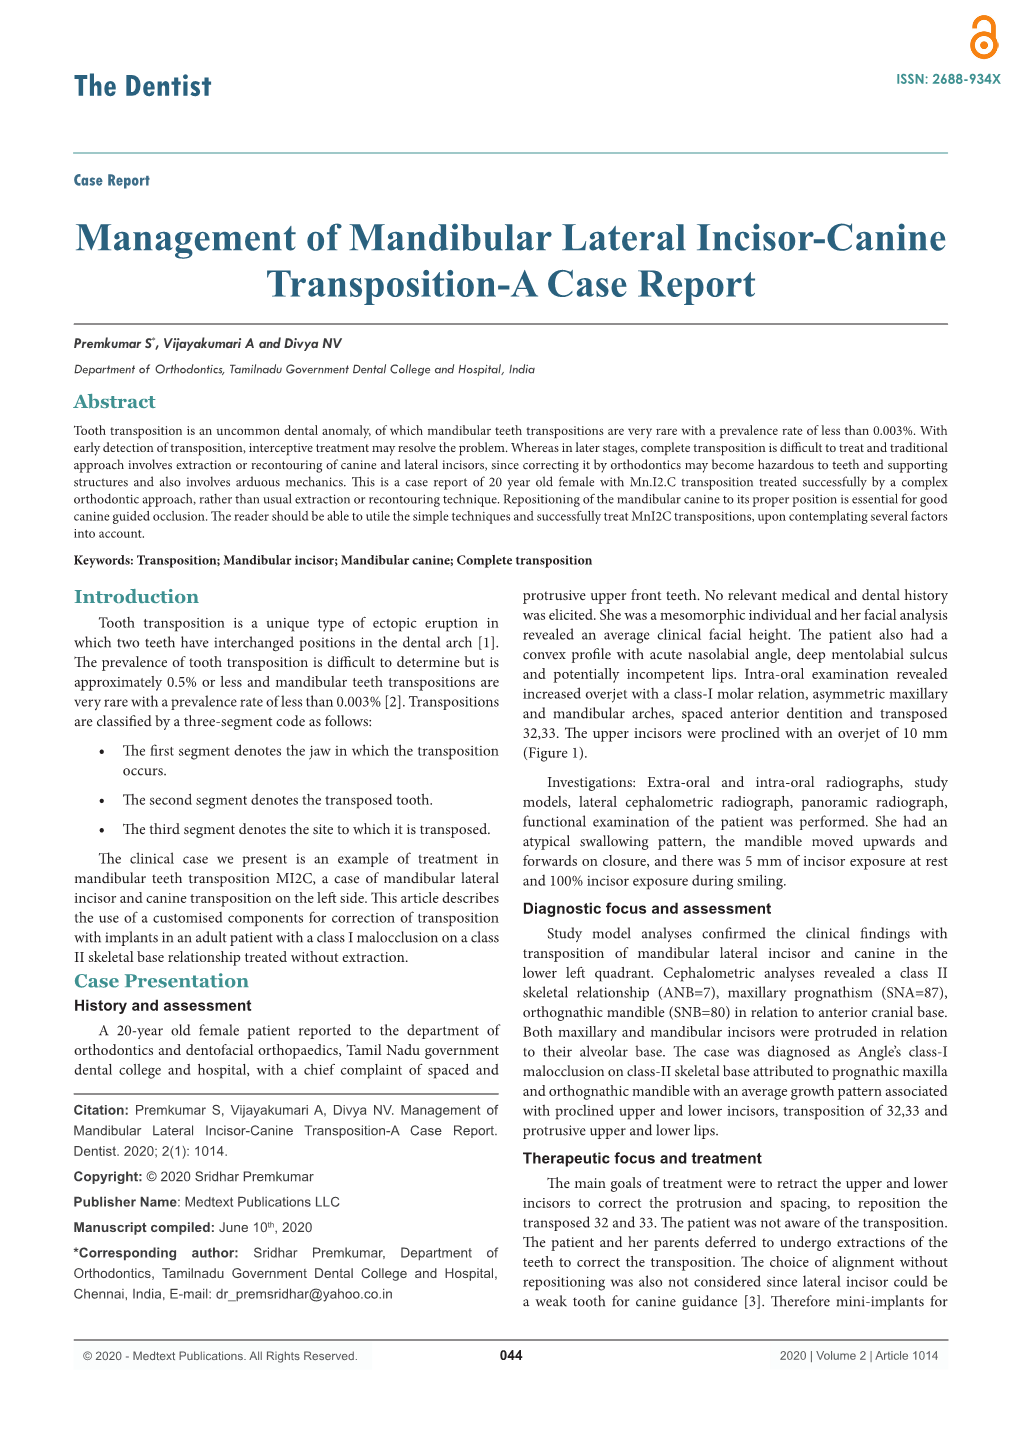 Management of Mandibular Lateral Incisor-Canine Transposition-A Case Report